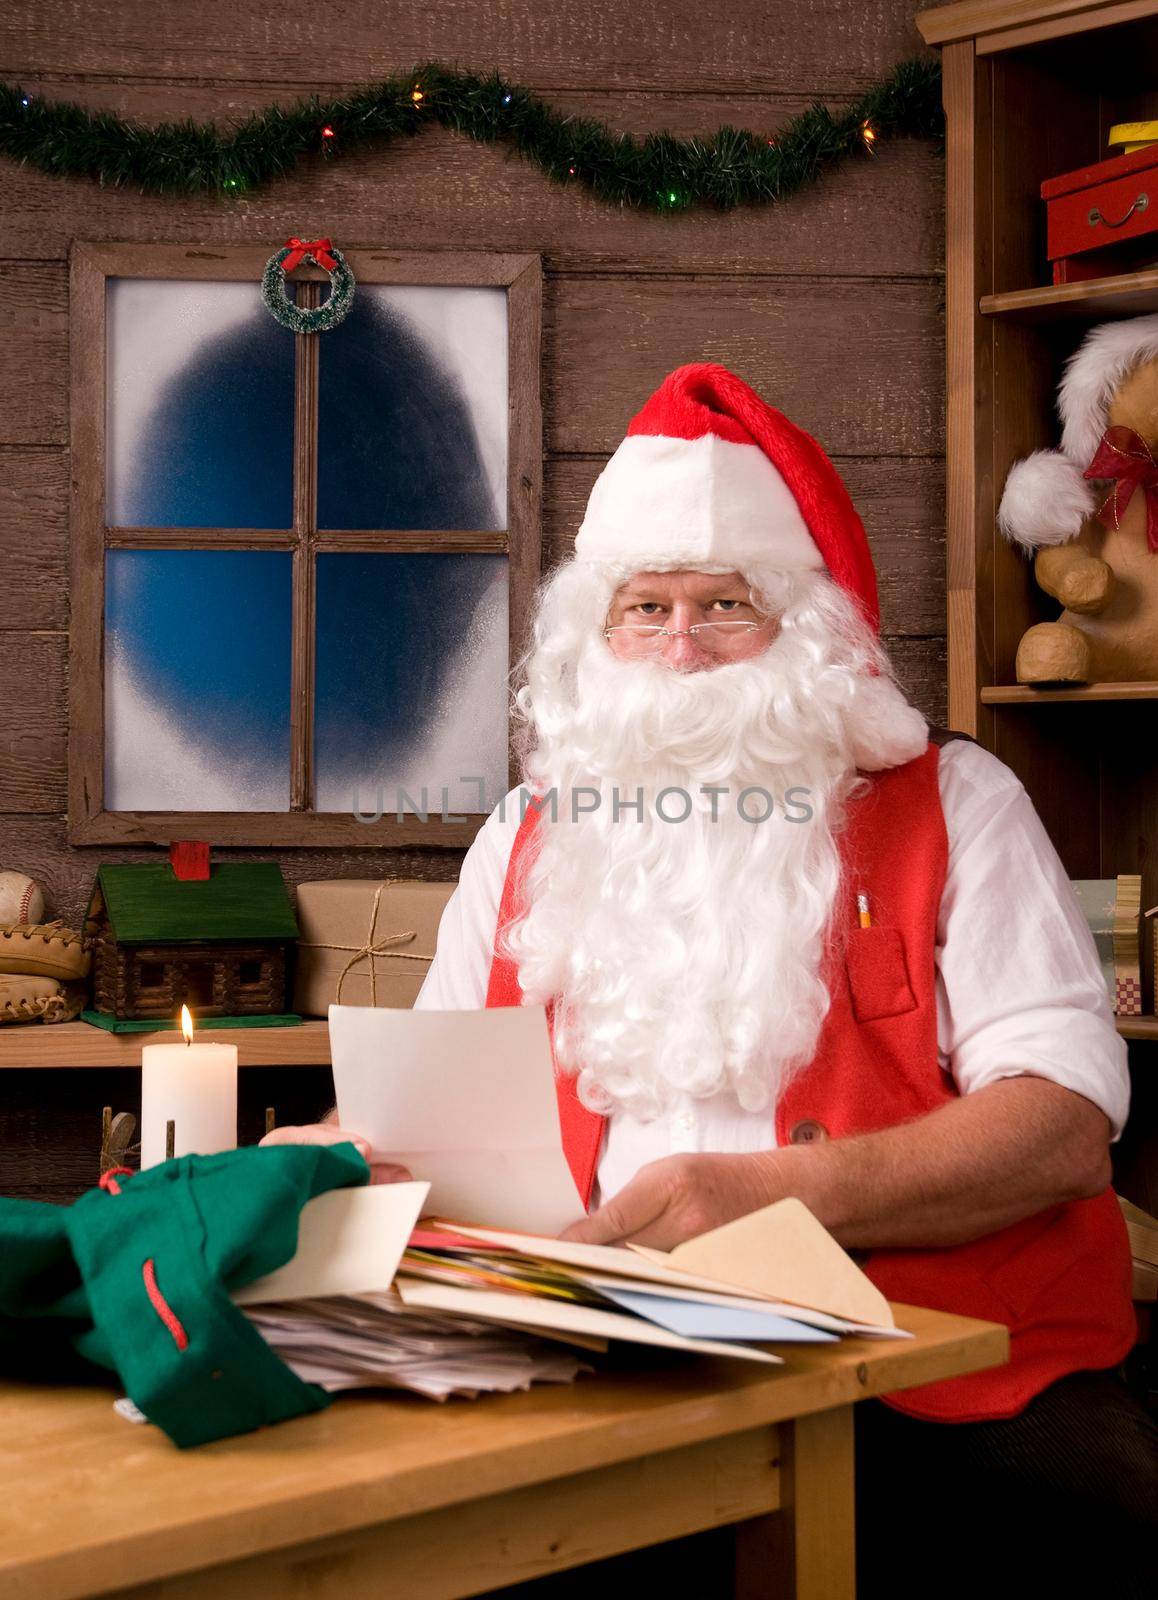 Santa Claus Sitting in His Workshop Painting reading letters. Vertical Composition.